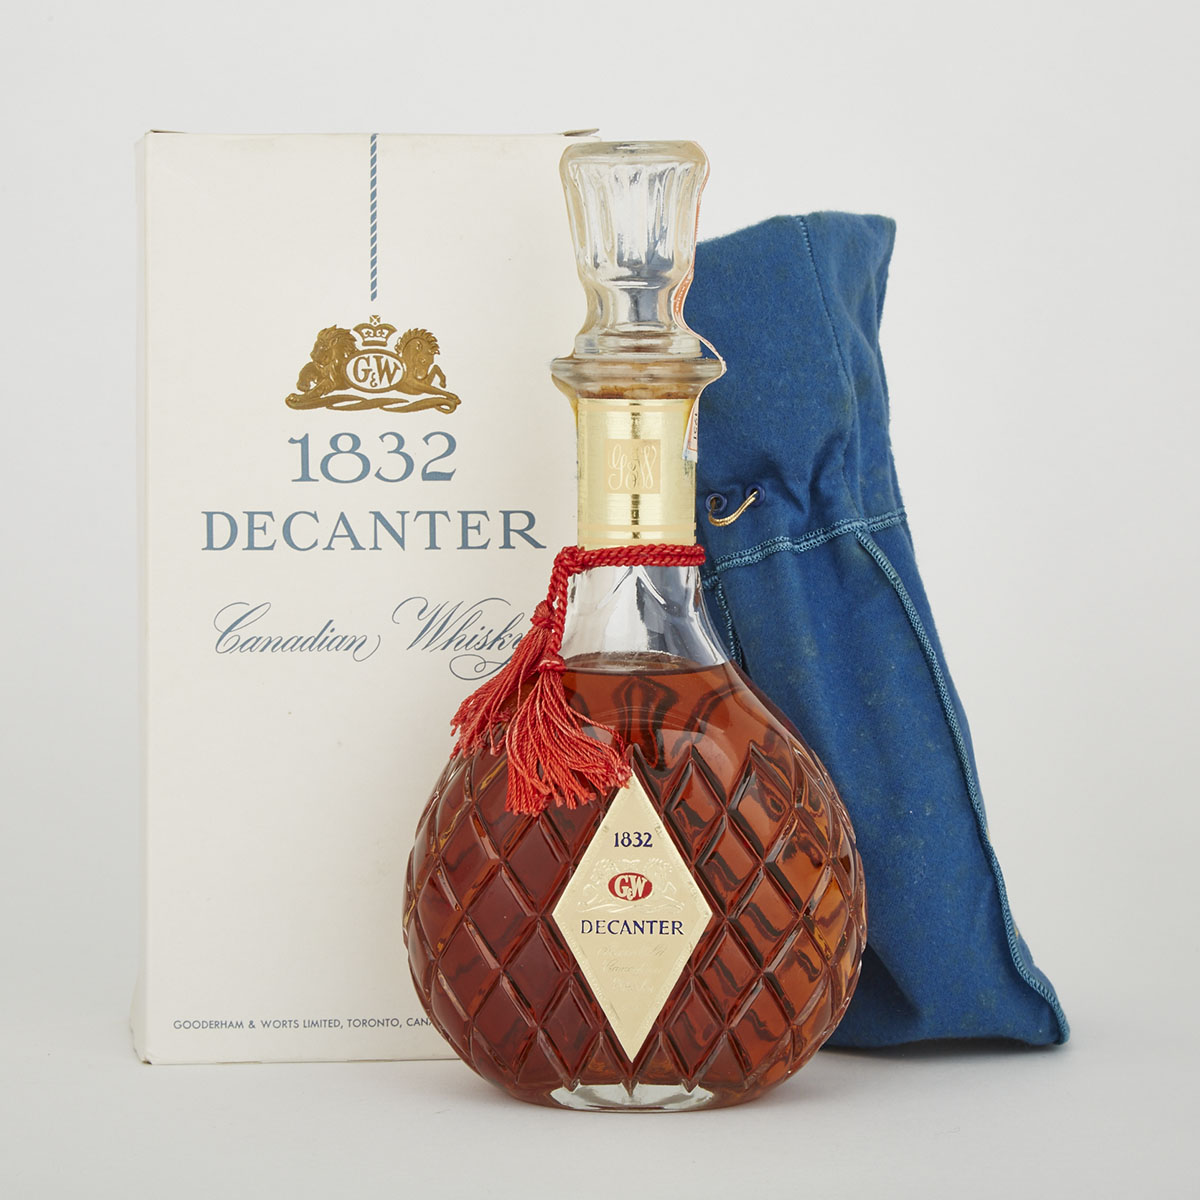 GOODERHAM & WORTS 1832 DECANTER RARE OLD CANADIAN WHISKY  (1)